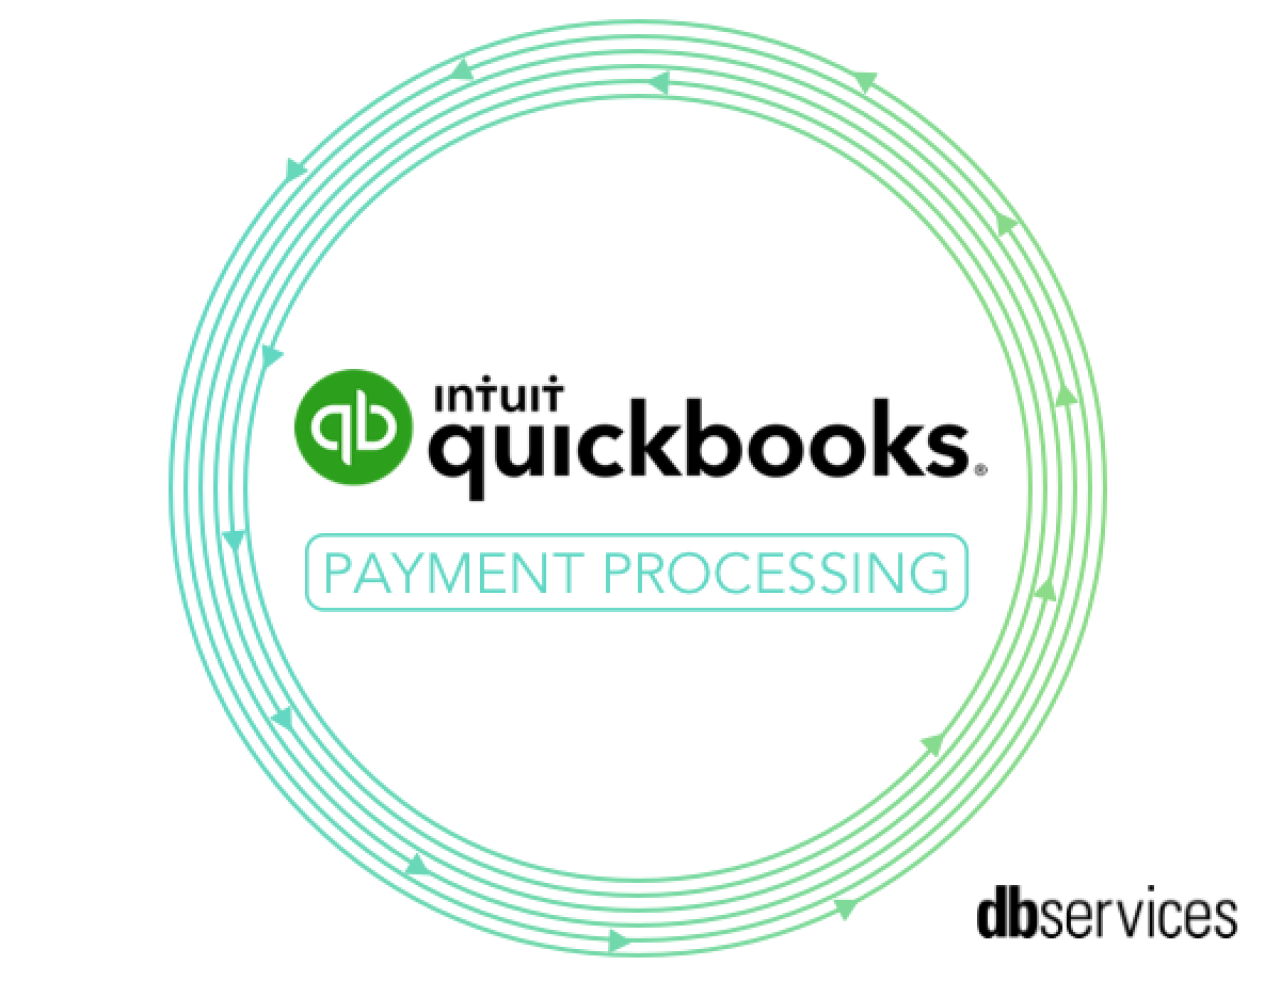 payment processing with quickbooks.